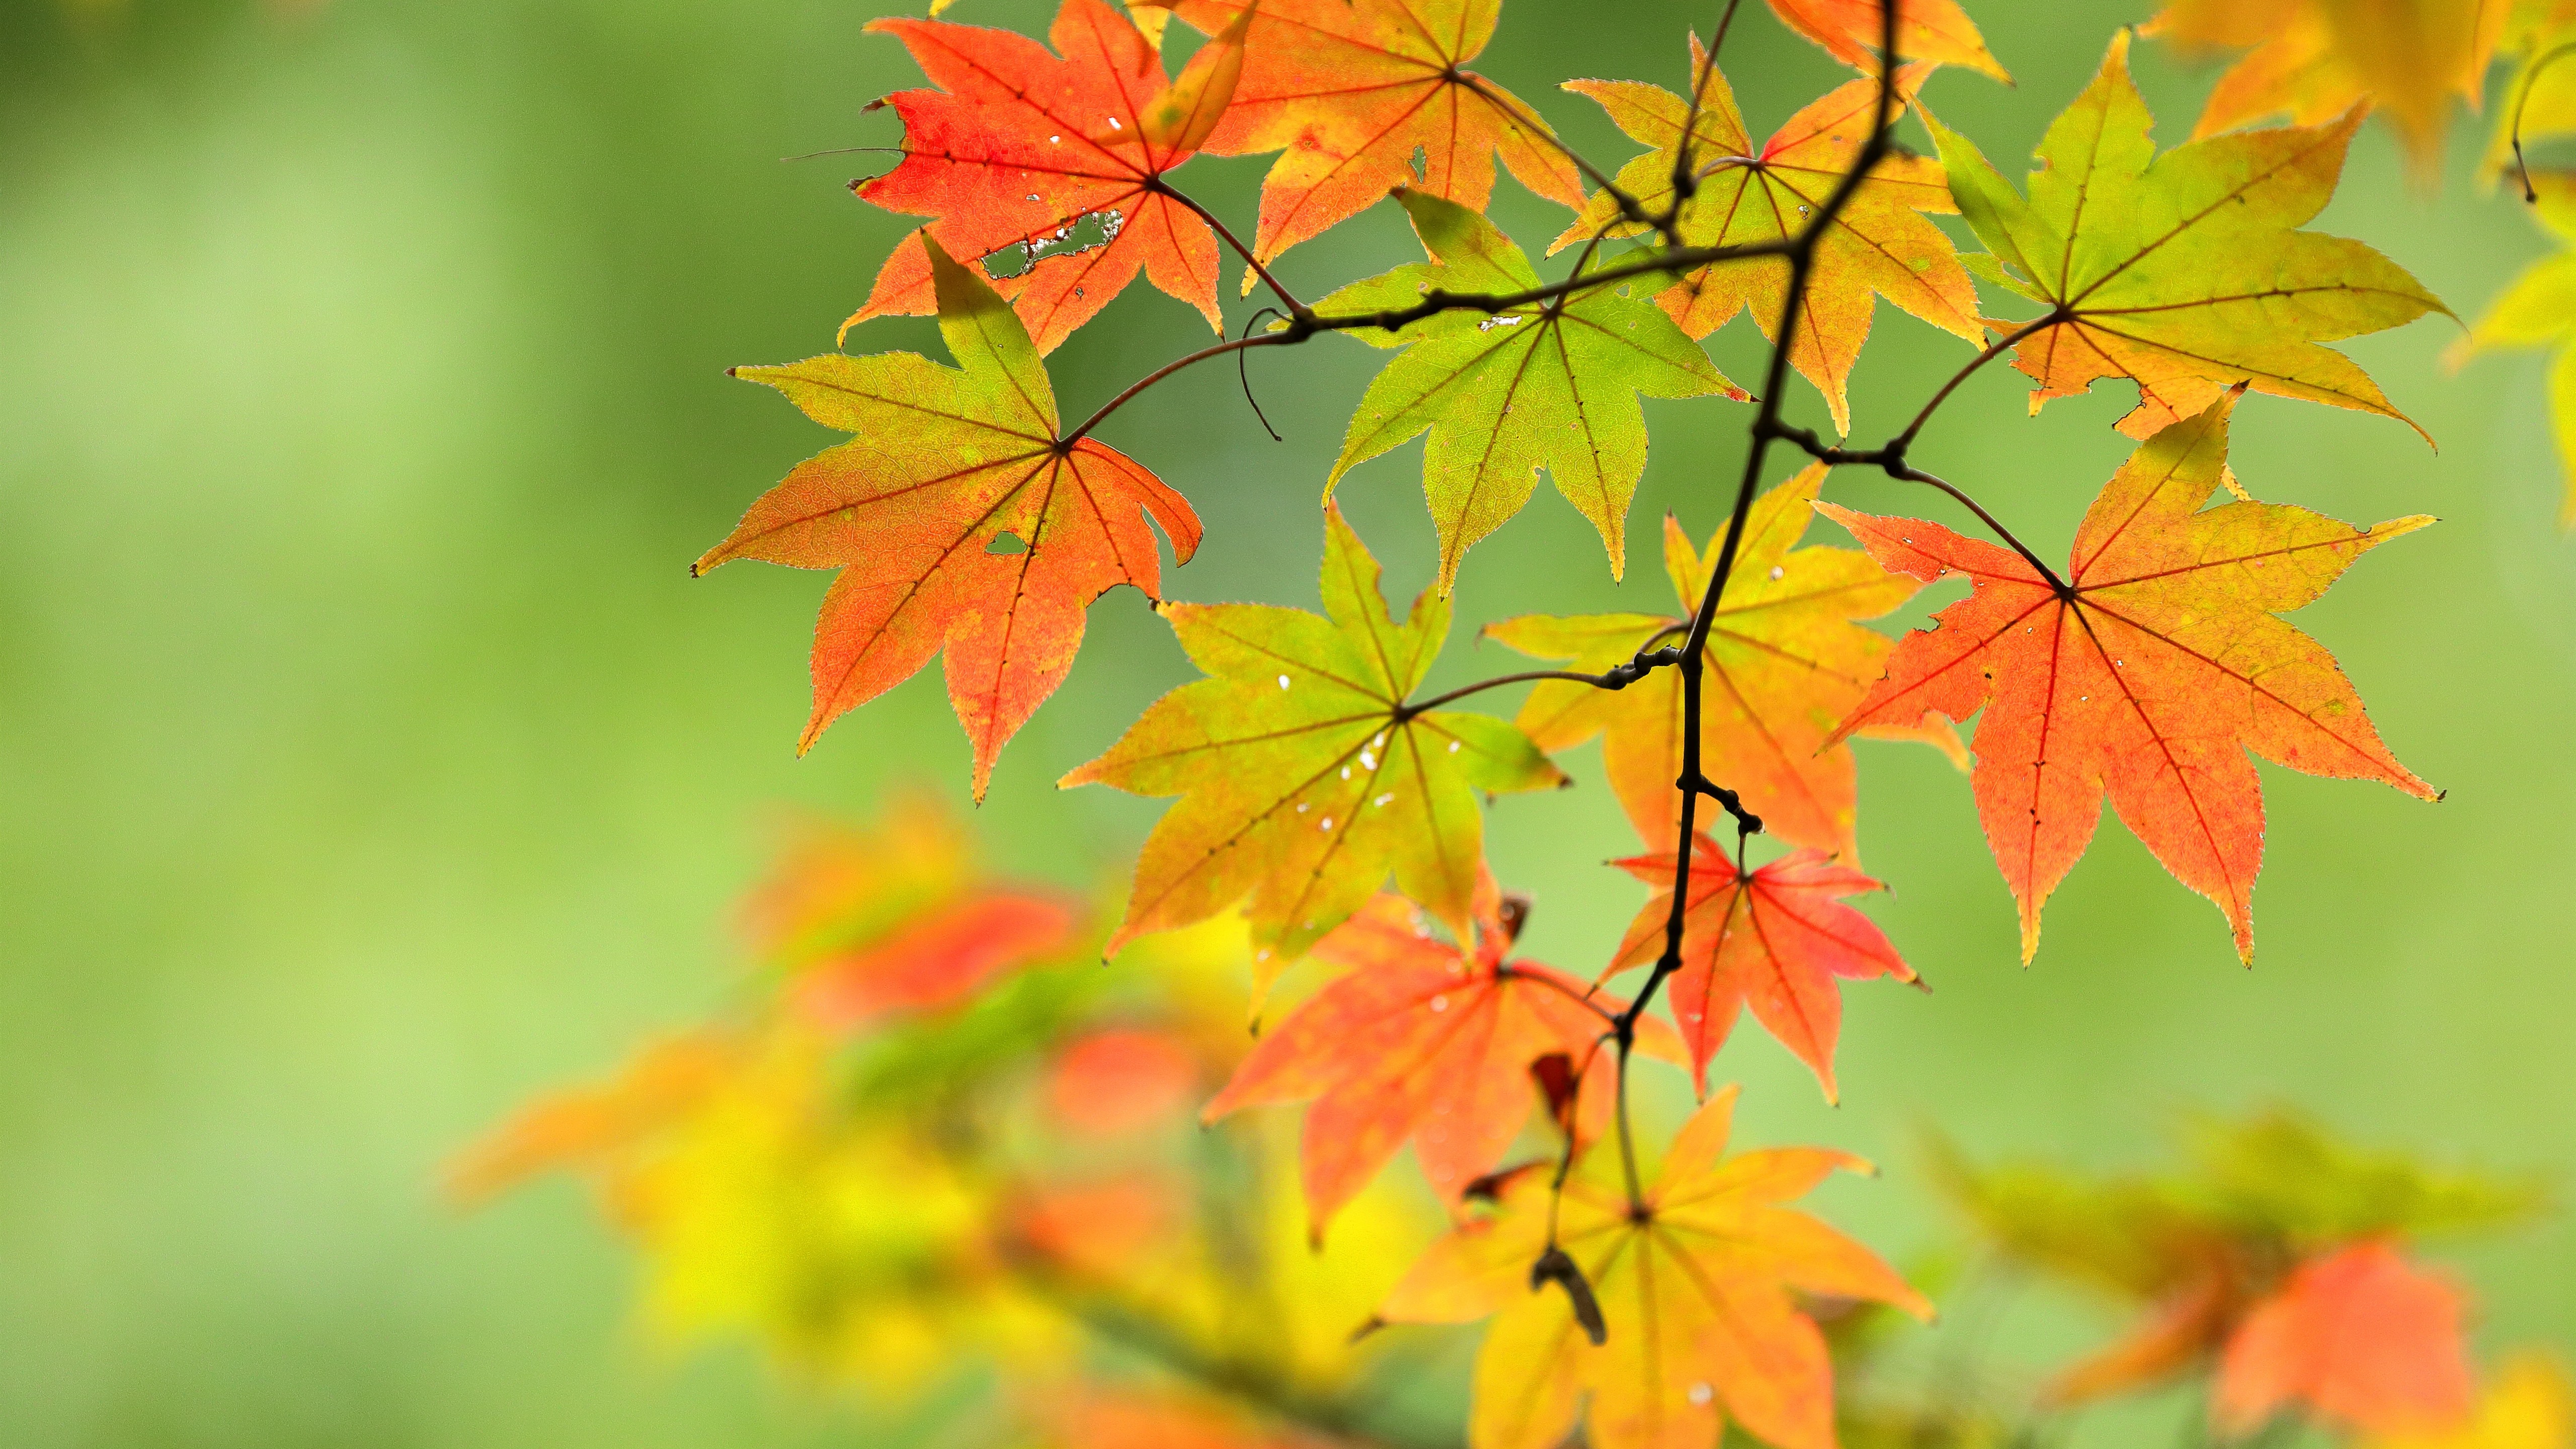 Wallpaper Autumn, maple leaves, twigs, nature 5120x2880 UHD 5K Picture, Image